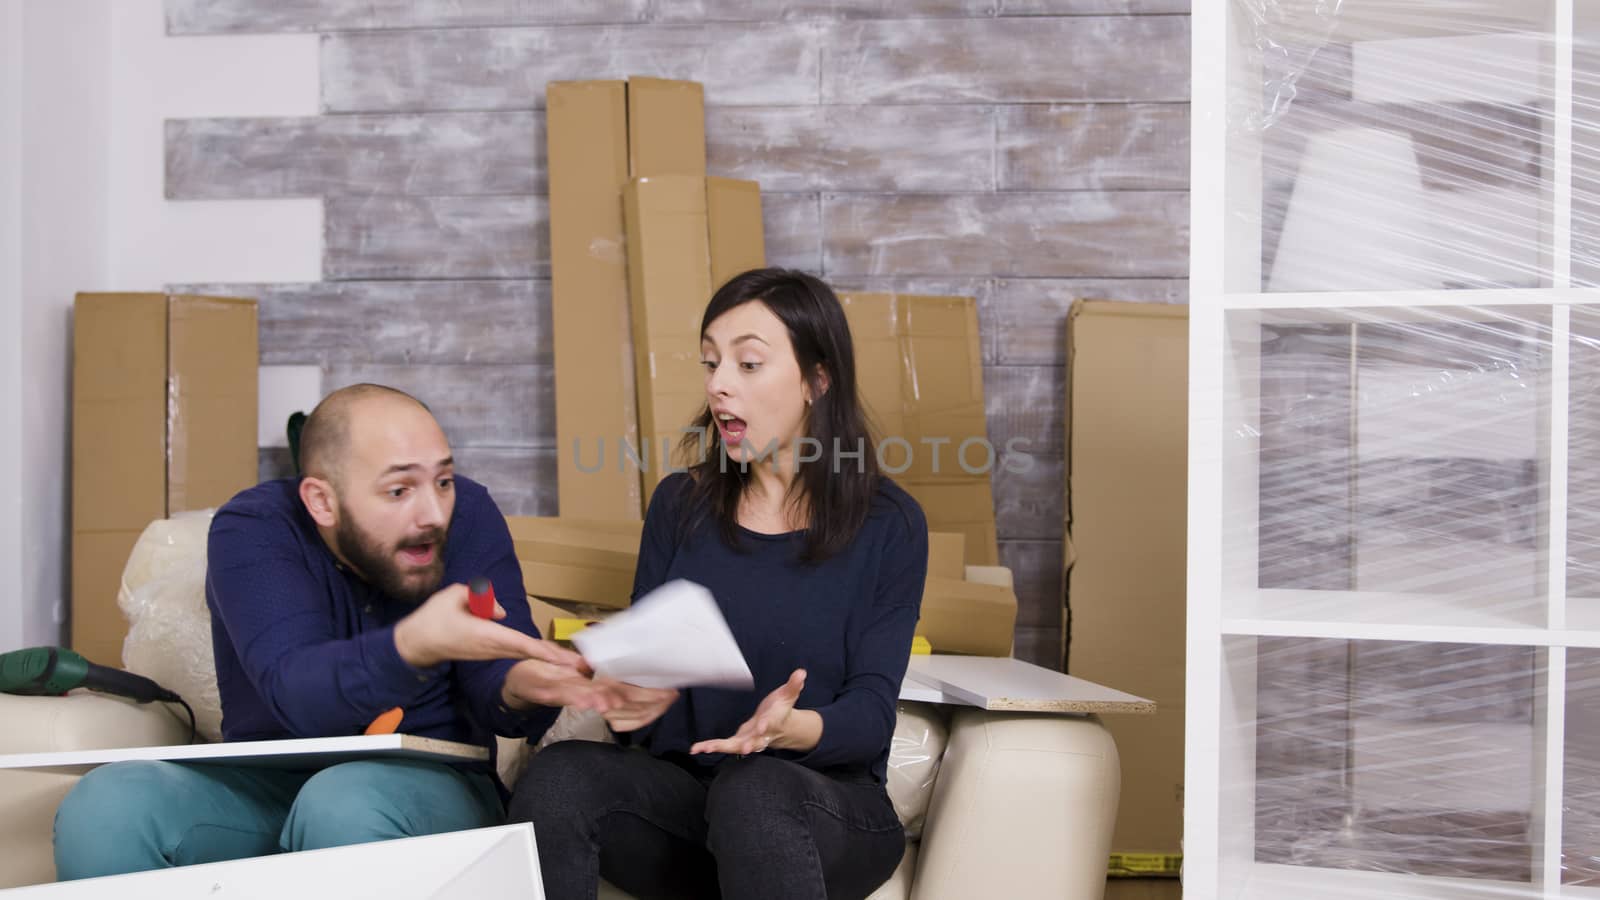 Girlfriend hitting boyfriend with instructions while assembling furniture by DCStudio